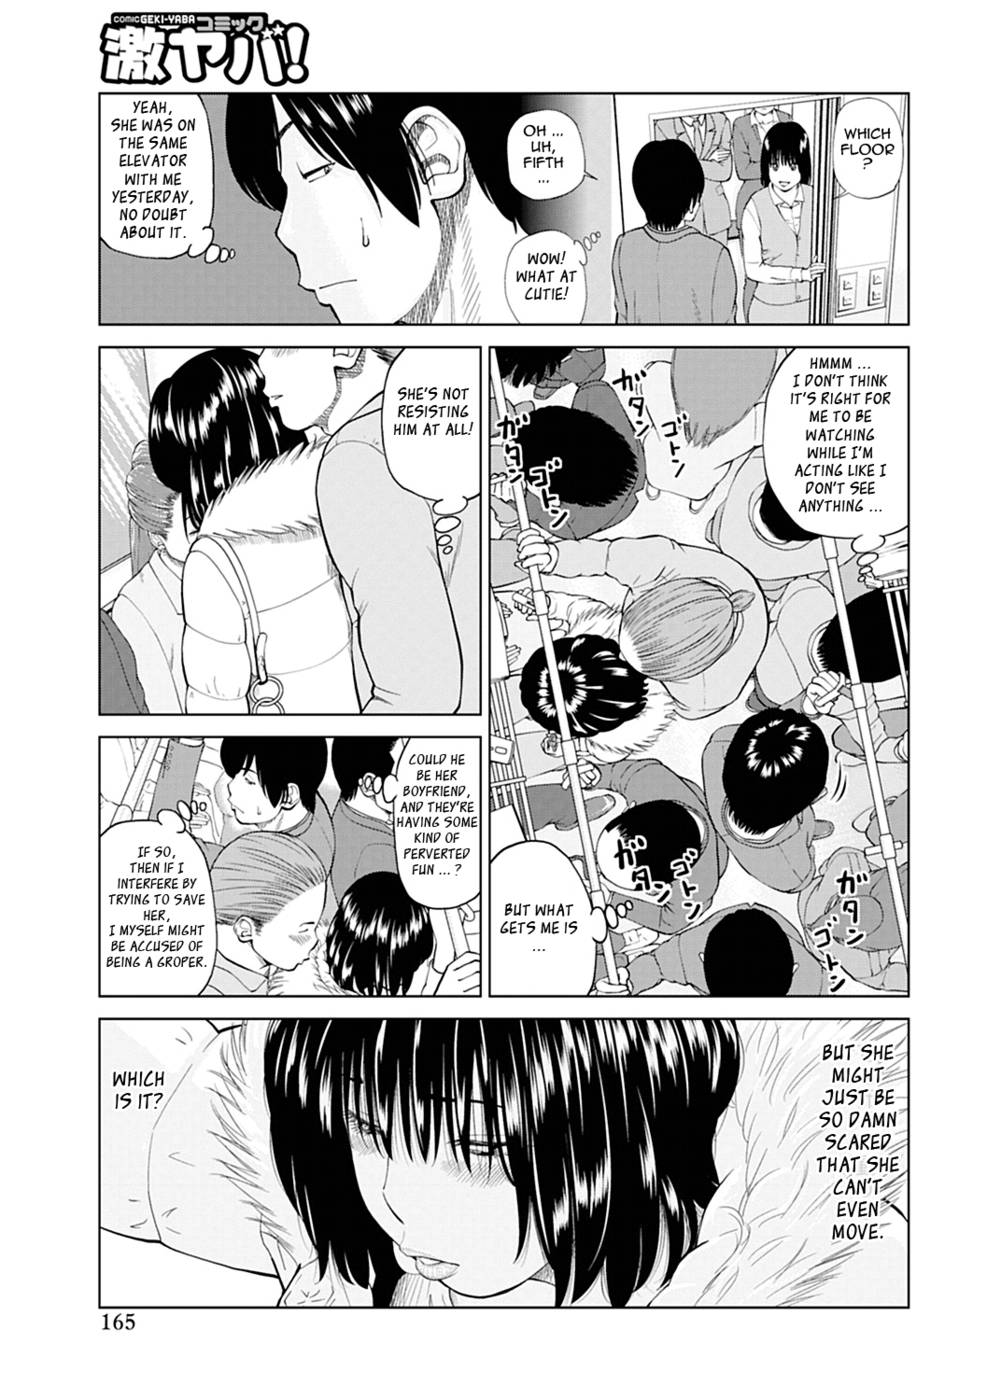 Hentai Manga Comic-34 Year Old Unsatisfied Wife-Chapter 9-Uniforms Office Lady-First Half-3